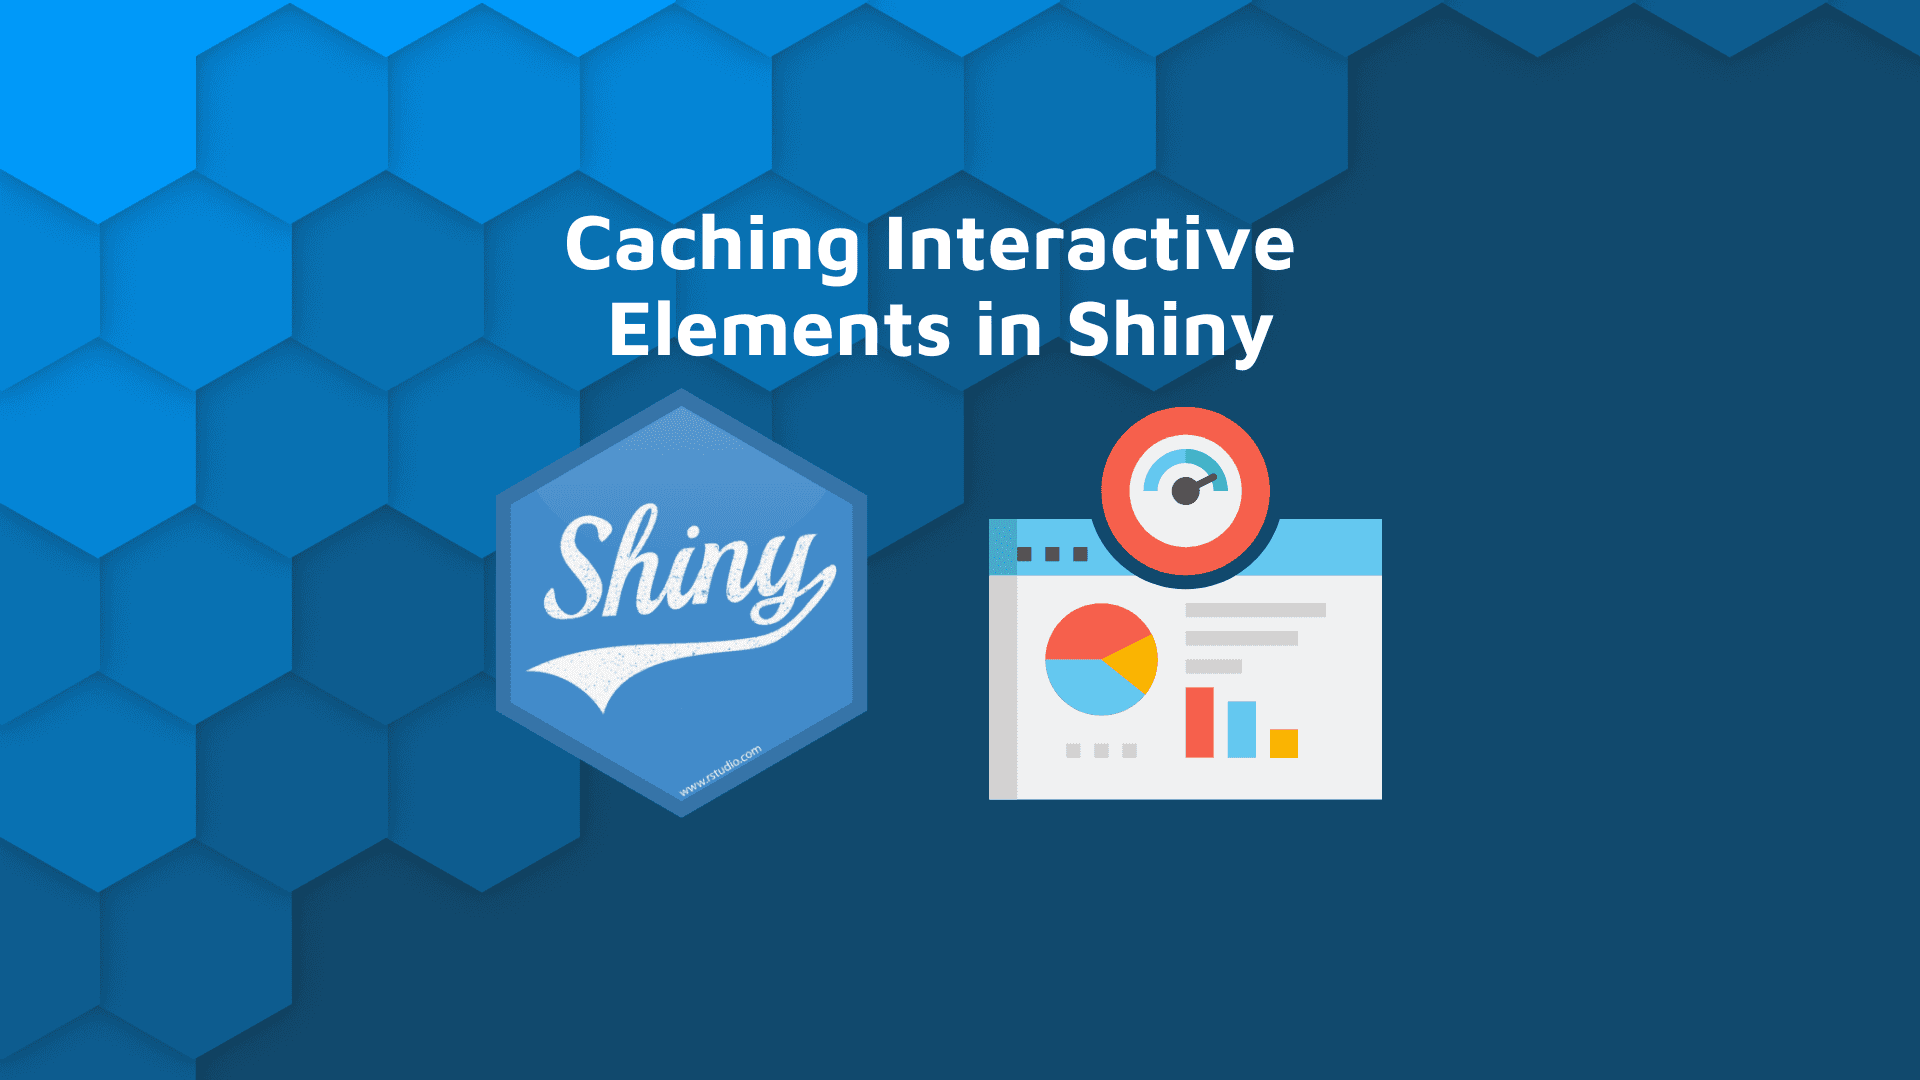 blog banner with white text "Caching Interactive Elements in Shiny" and Shiny open source logo and a performance dashboard graphic